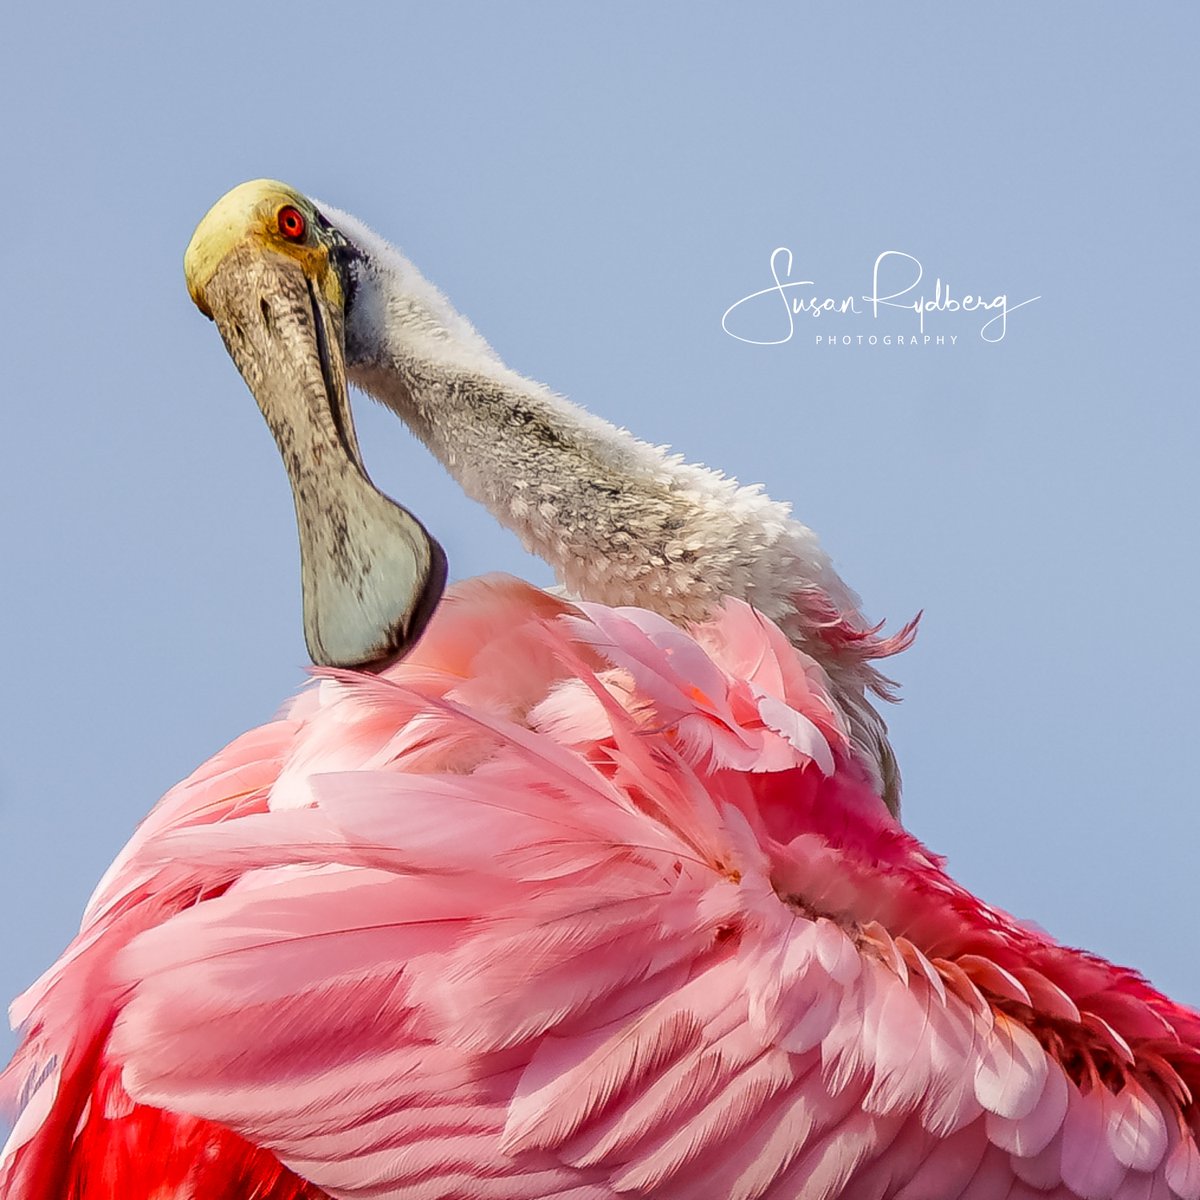 Roseate Spoonbill preening its pink feathers. Like the flamingo, the roseate spoonbill's pink color comes from the food it eats. The roseate spoonbill can be found on the coasts of Texas, Louisiana and southern Florida. #bird #Birdland #BirdsSeenIn2024 #photo #photography